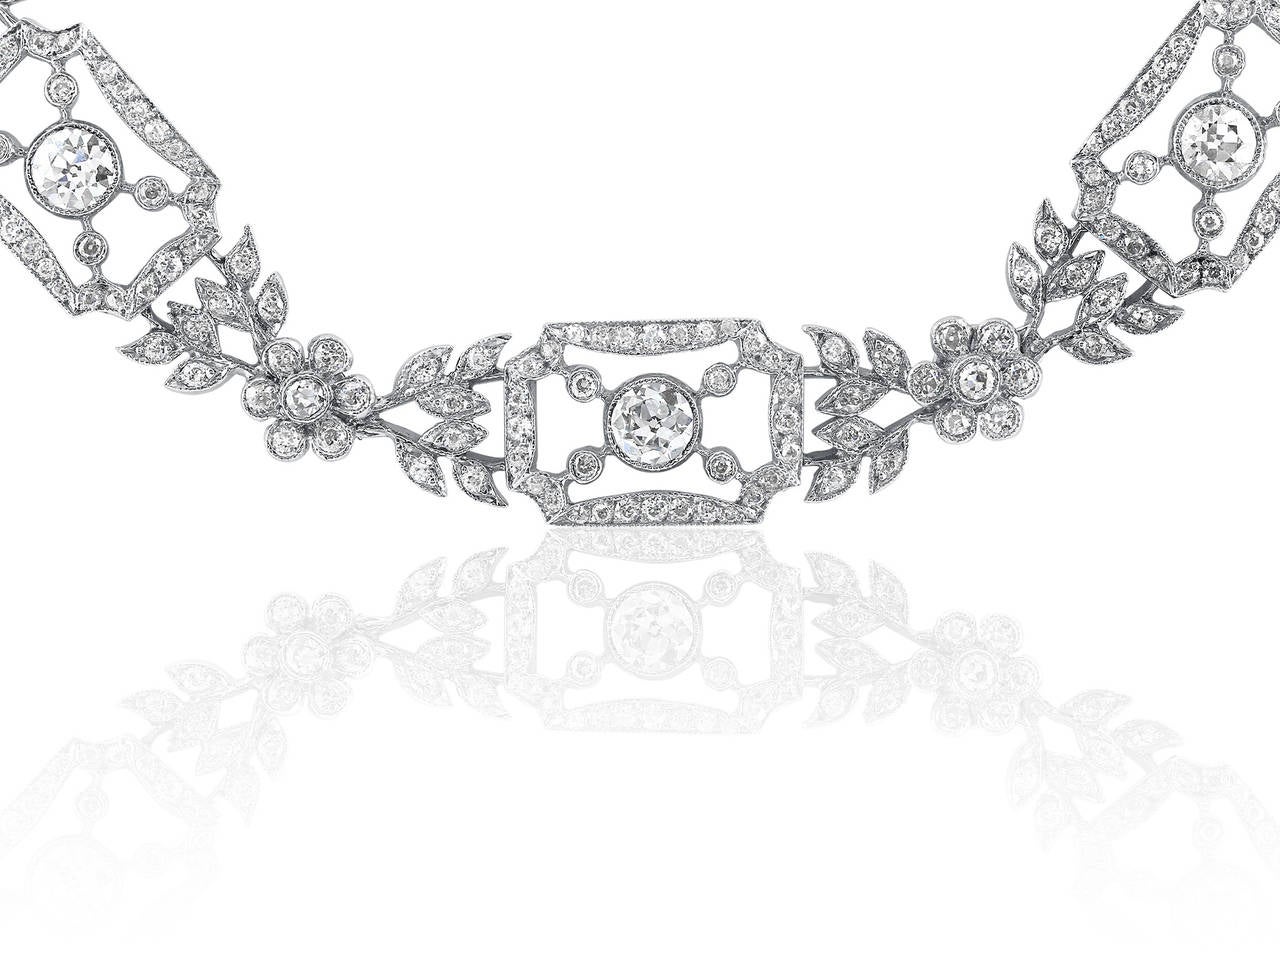 Platinum and diamond open work vintage style necklace consisting of approximately 15.00 carats total weight of round brilliant cut diamonds.